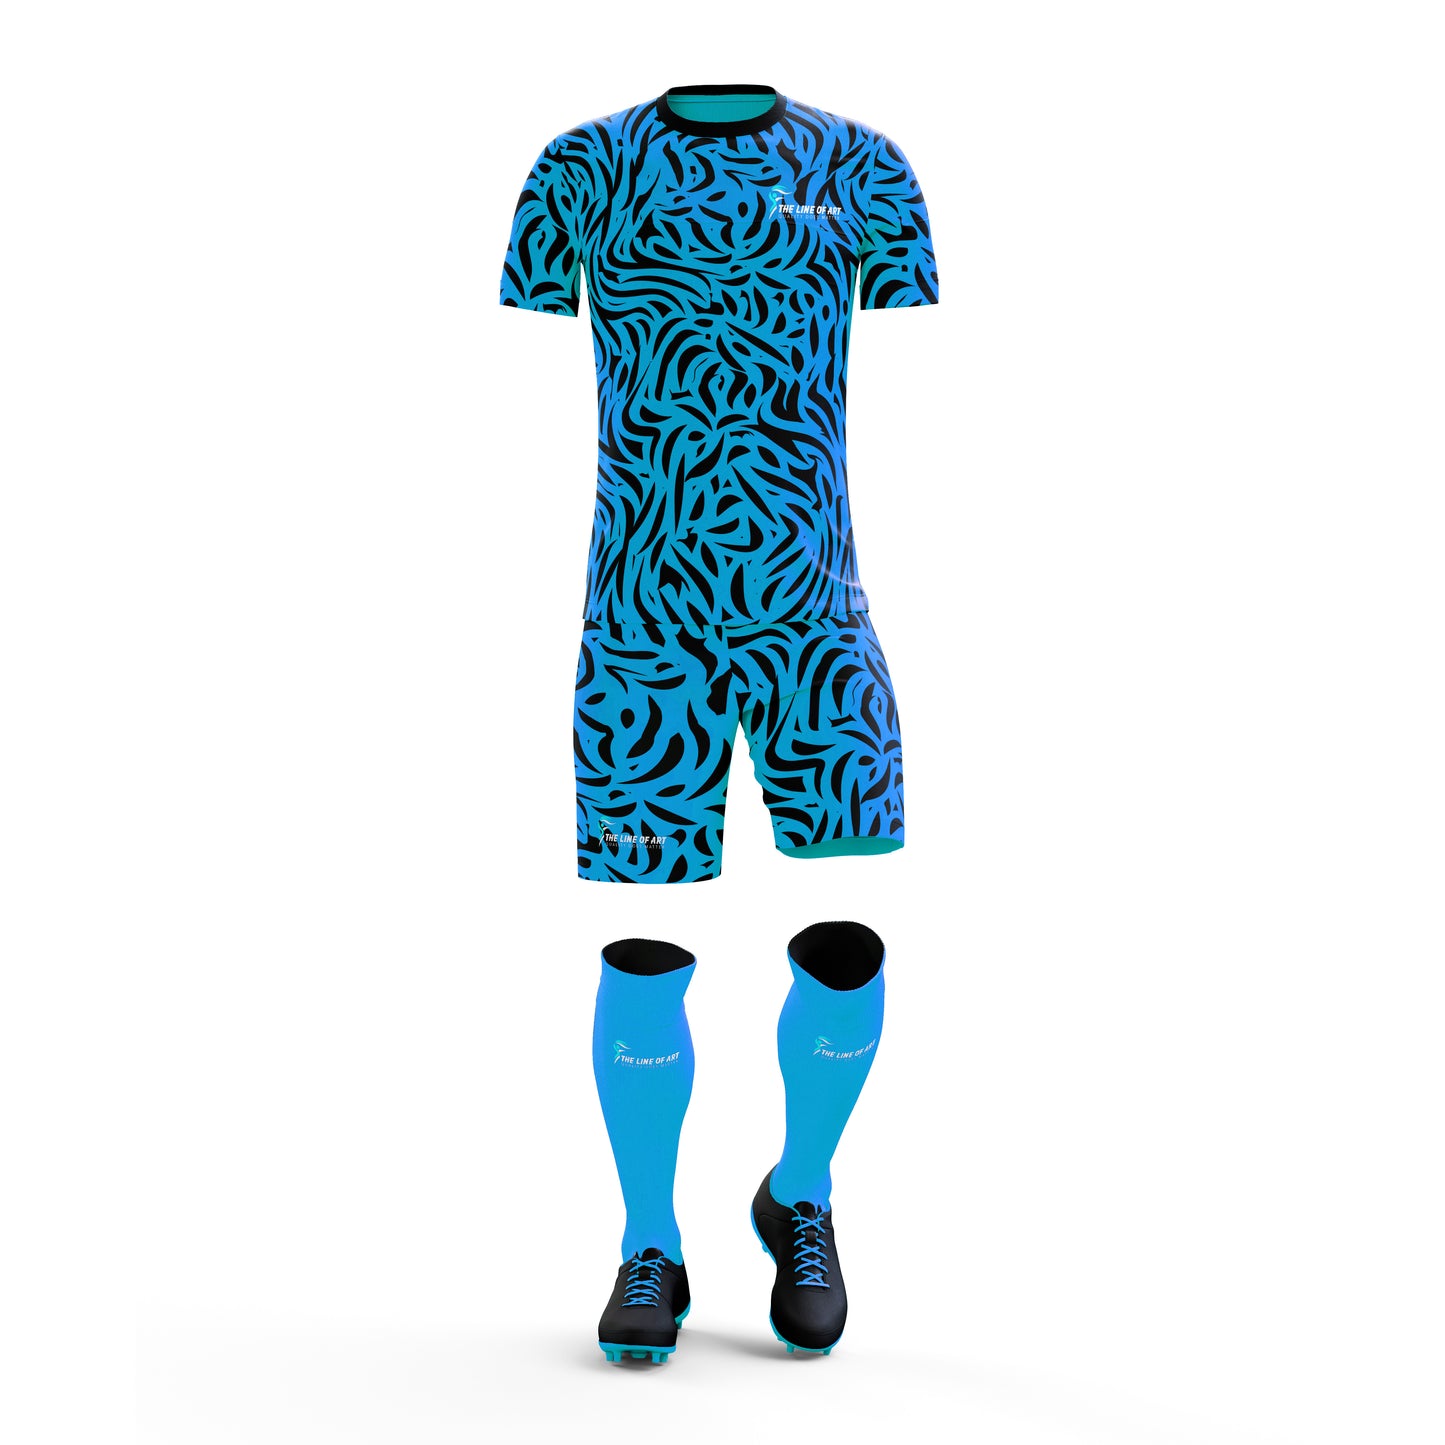 Sublimated Soccer Jersey With Shorts Printed Design Sportswear T Shirts